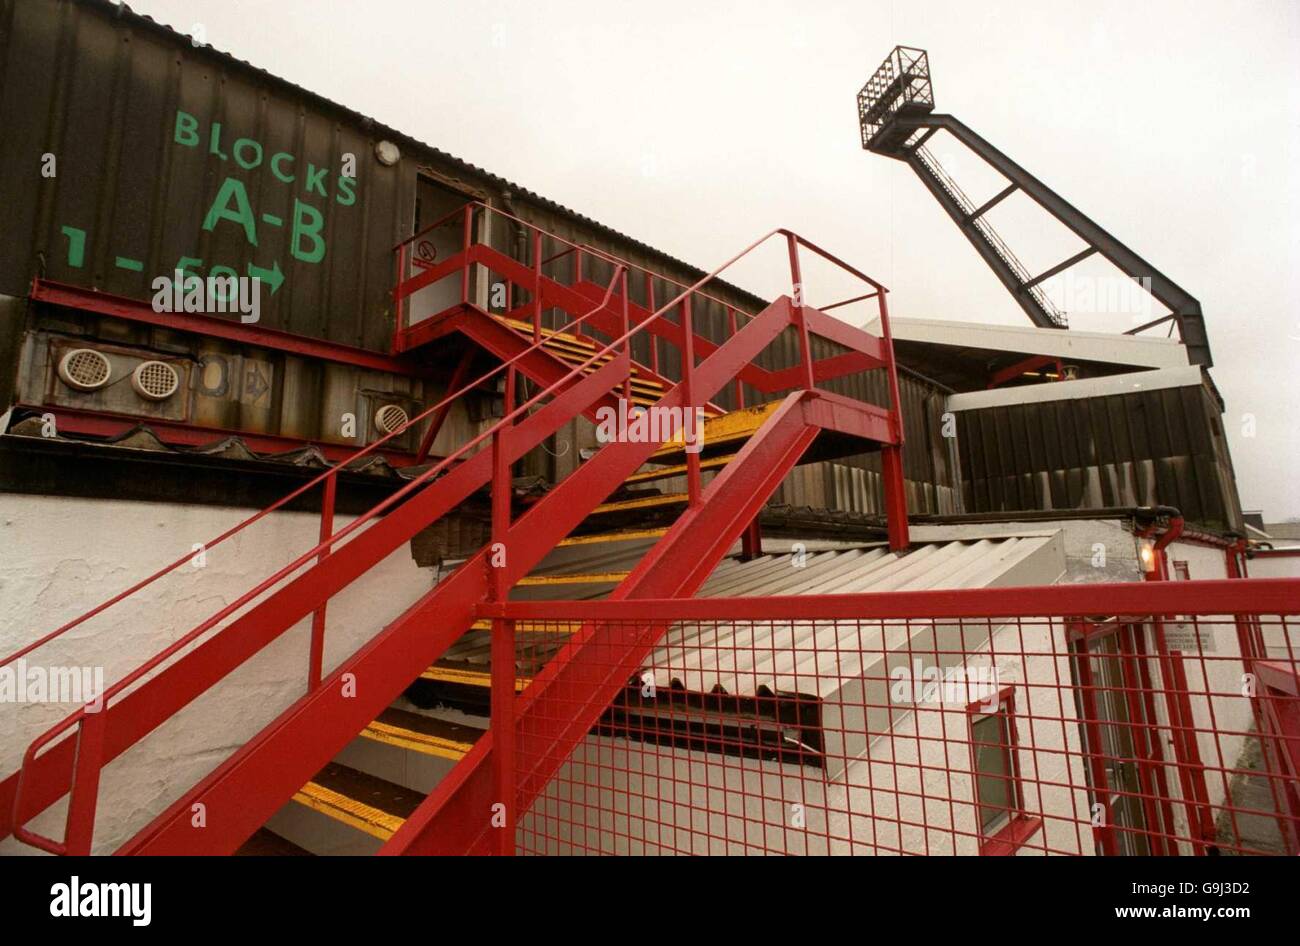 Soccer - Nationwide League Division Two - Swansea City v Millwall. The stairway leading to blocks A and B at Swansea City's Vetch Field ground Stock Photo